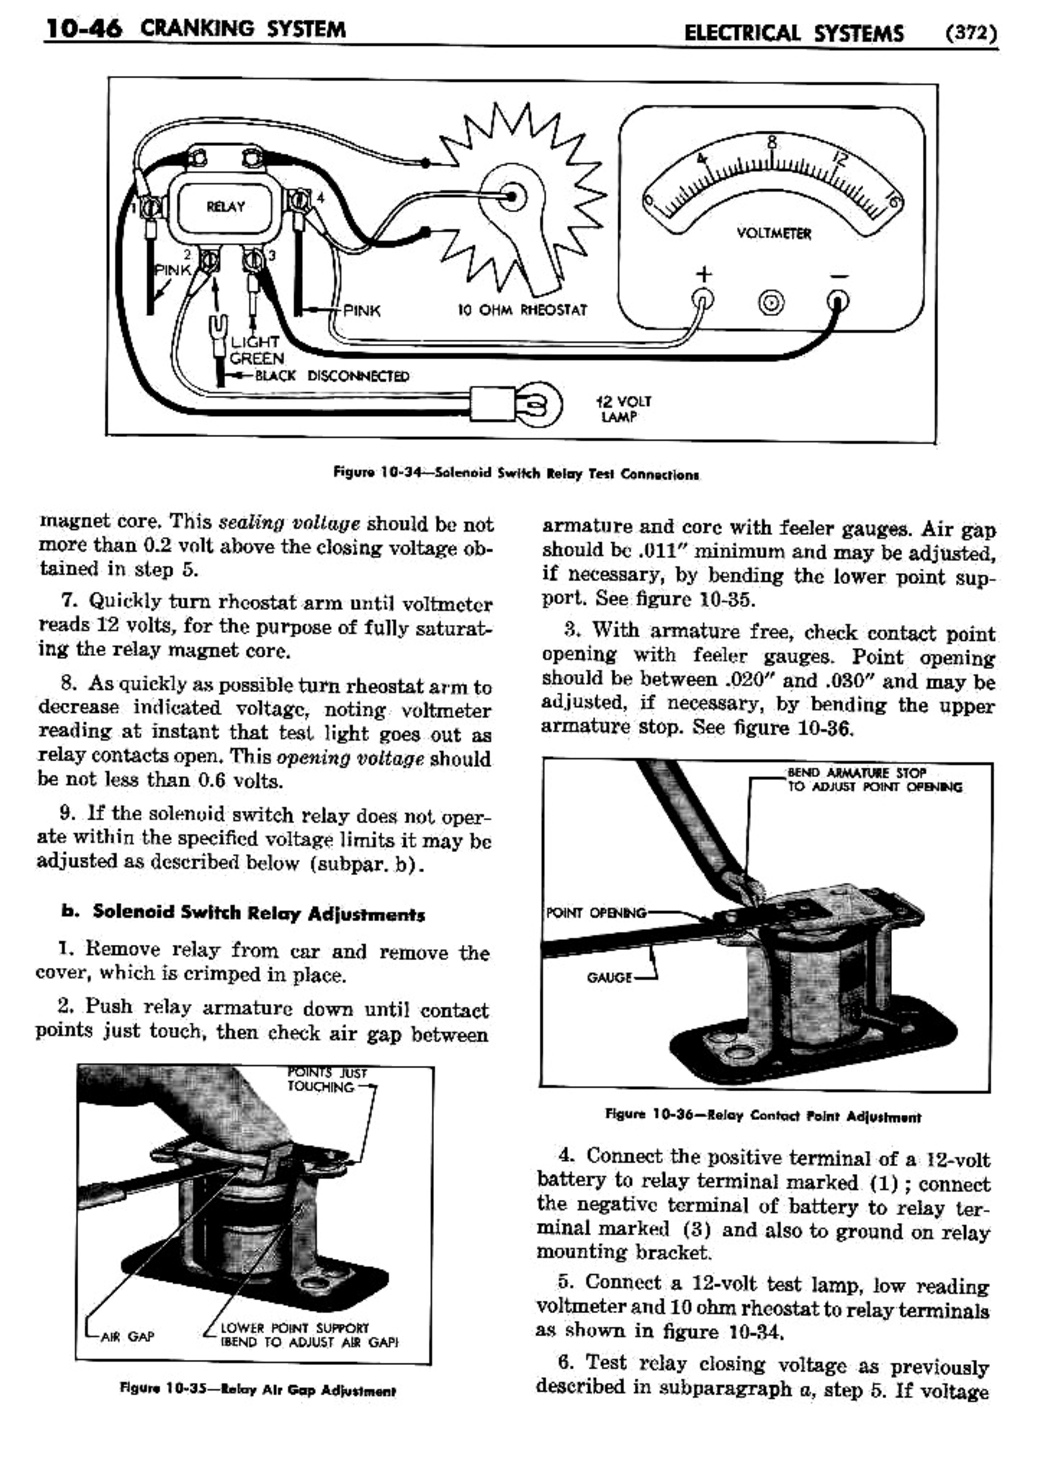 n_11 1956 Buick Shop Manual - Electrical Systems-046-046.jpg